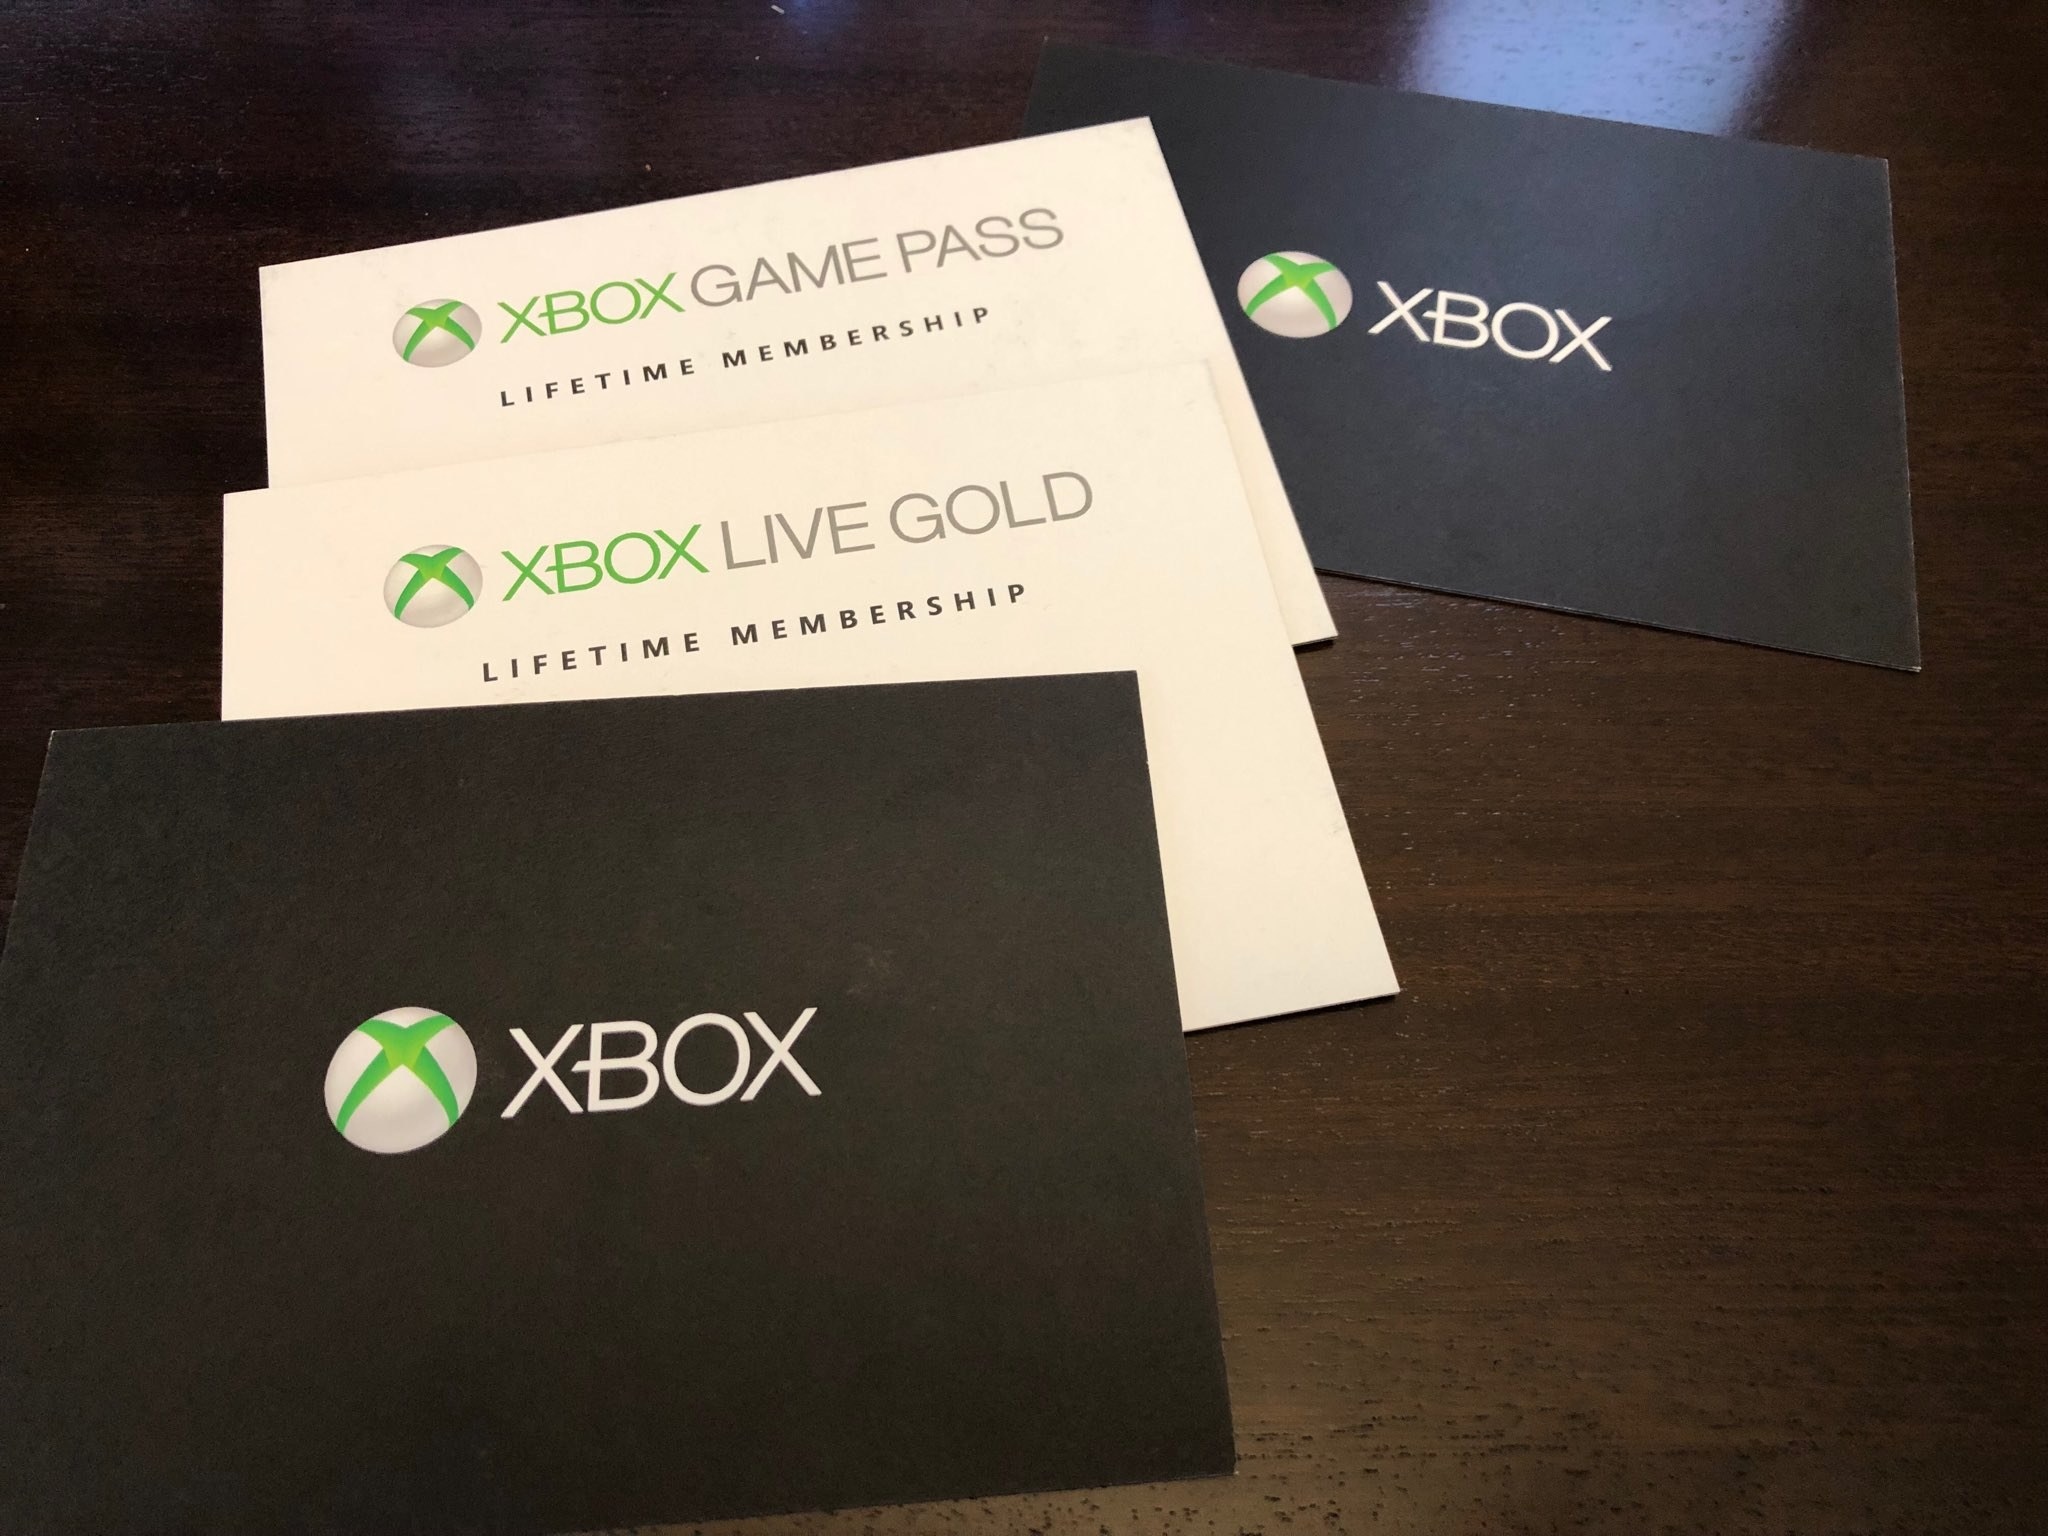 Box ultimate pass. Xbox Live Gold Ultimate. Xbox game Pass. Иксбокс гейм пасс. Подписка Xbox Ultimate.